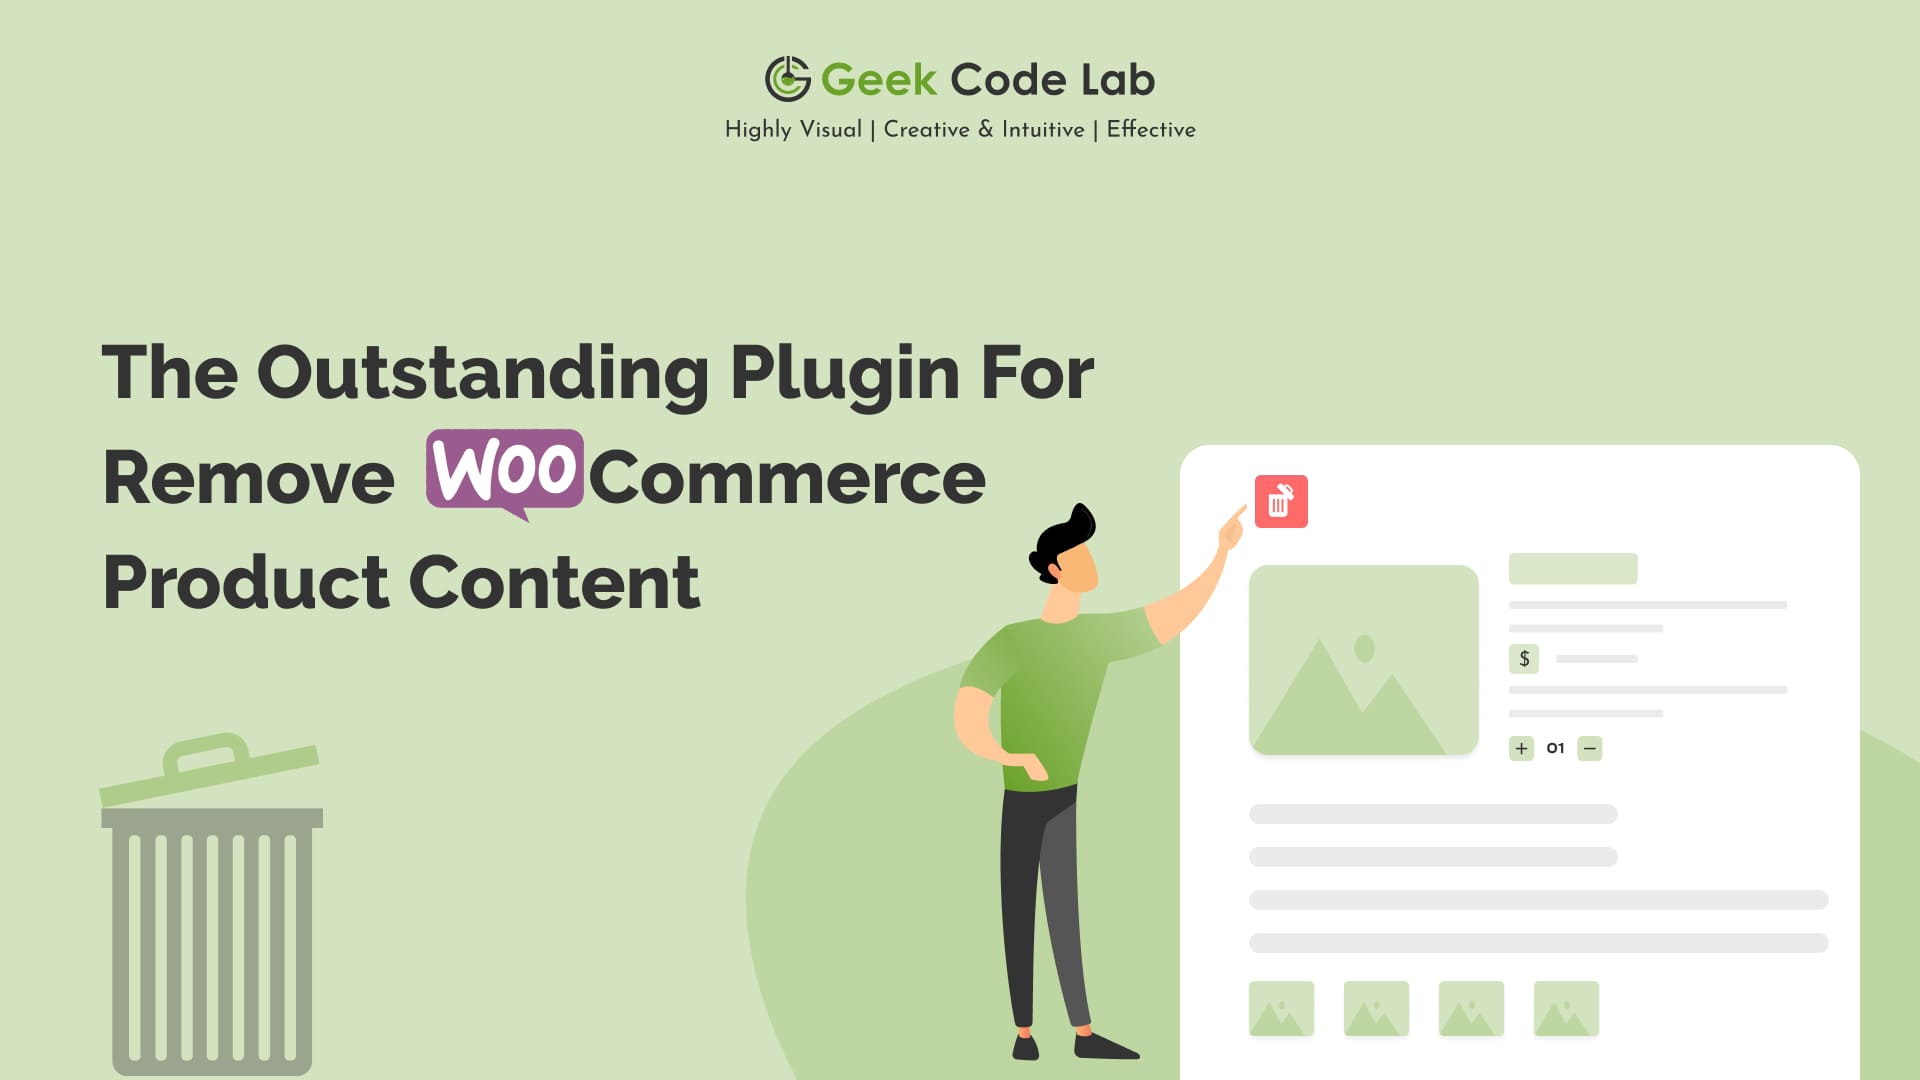 The Outstanding Plugin for Remove WooCommerce Product Content